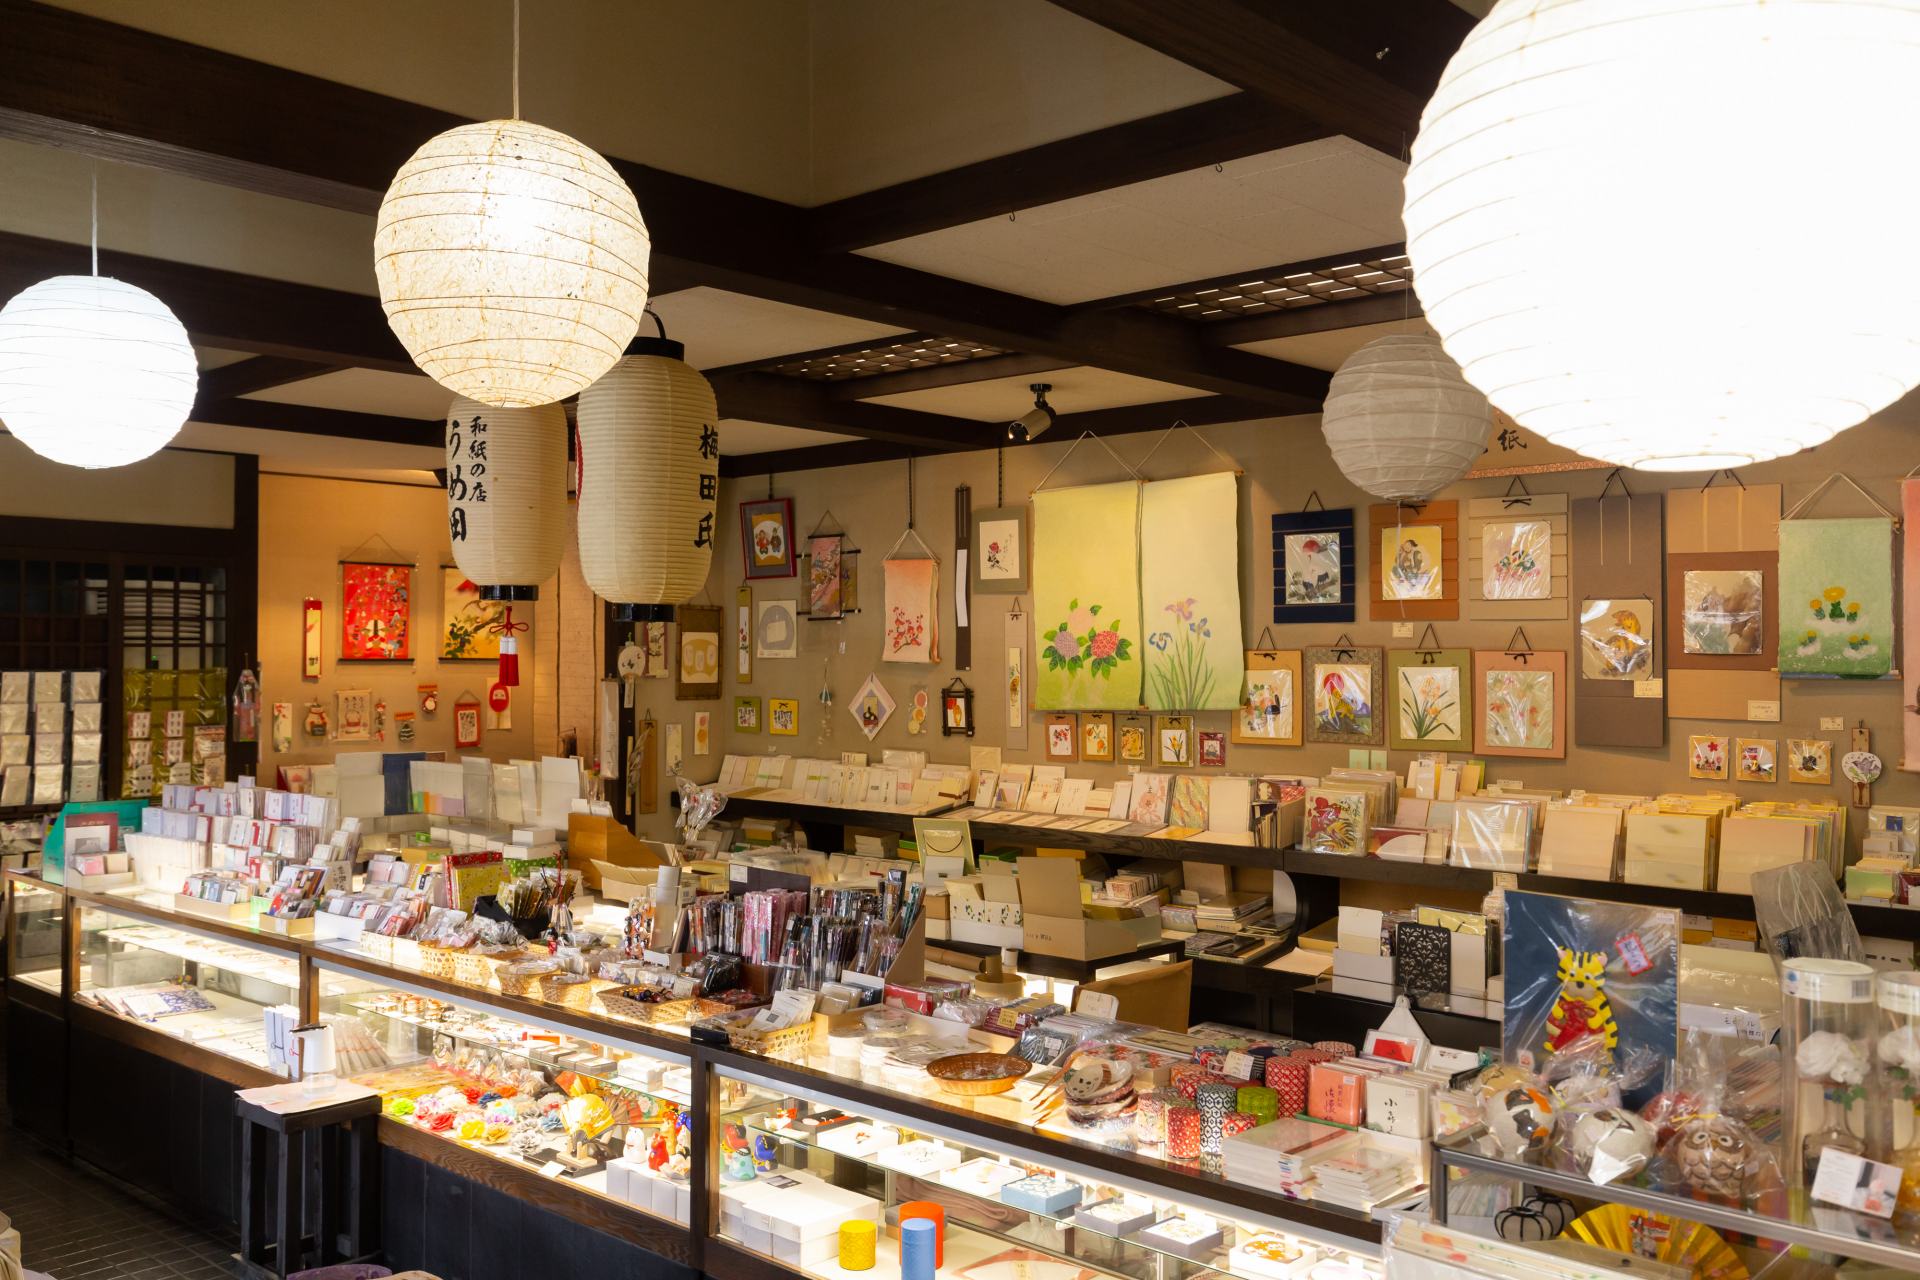 Echizen Washi paper as well as toys and tools derived from it at the Umeda shop.